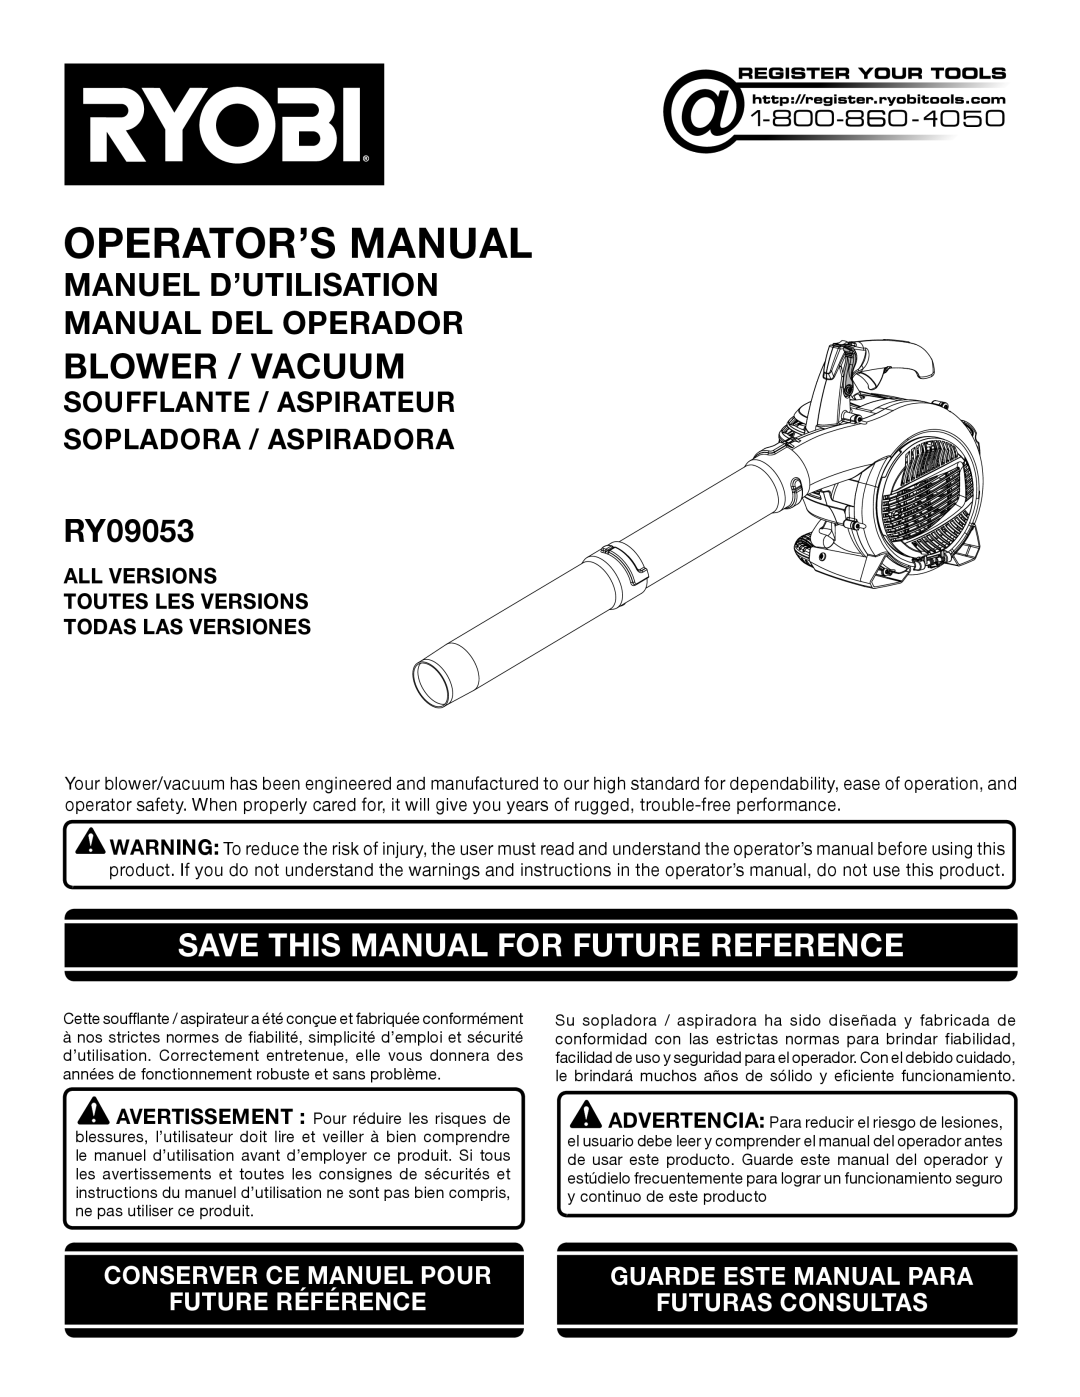 Ryobi RY09053 manuel dutilisation Blower / Vacuum, Save This Manual For Future Reference, All Versions Toutes Les Versions 